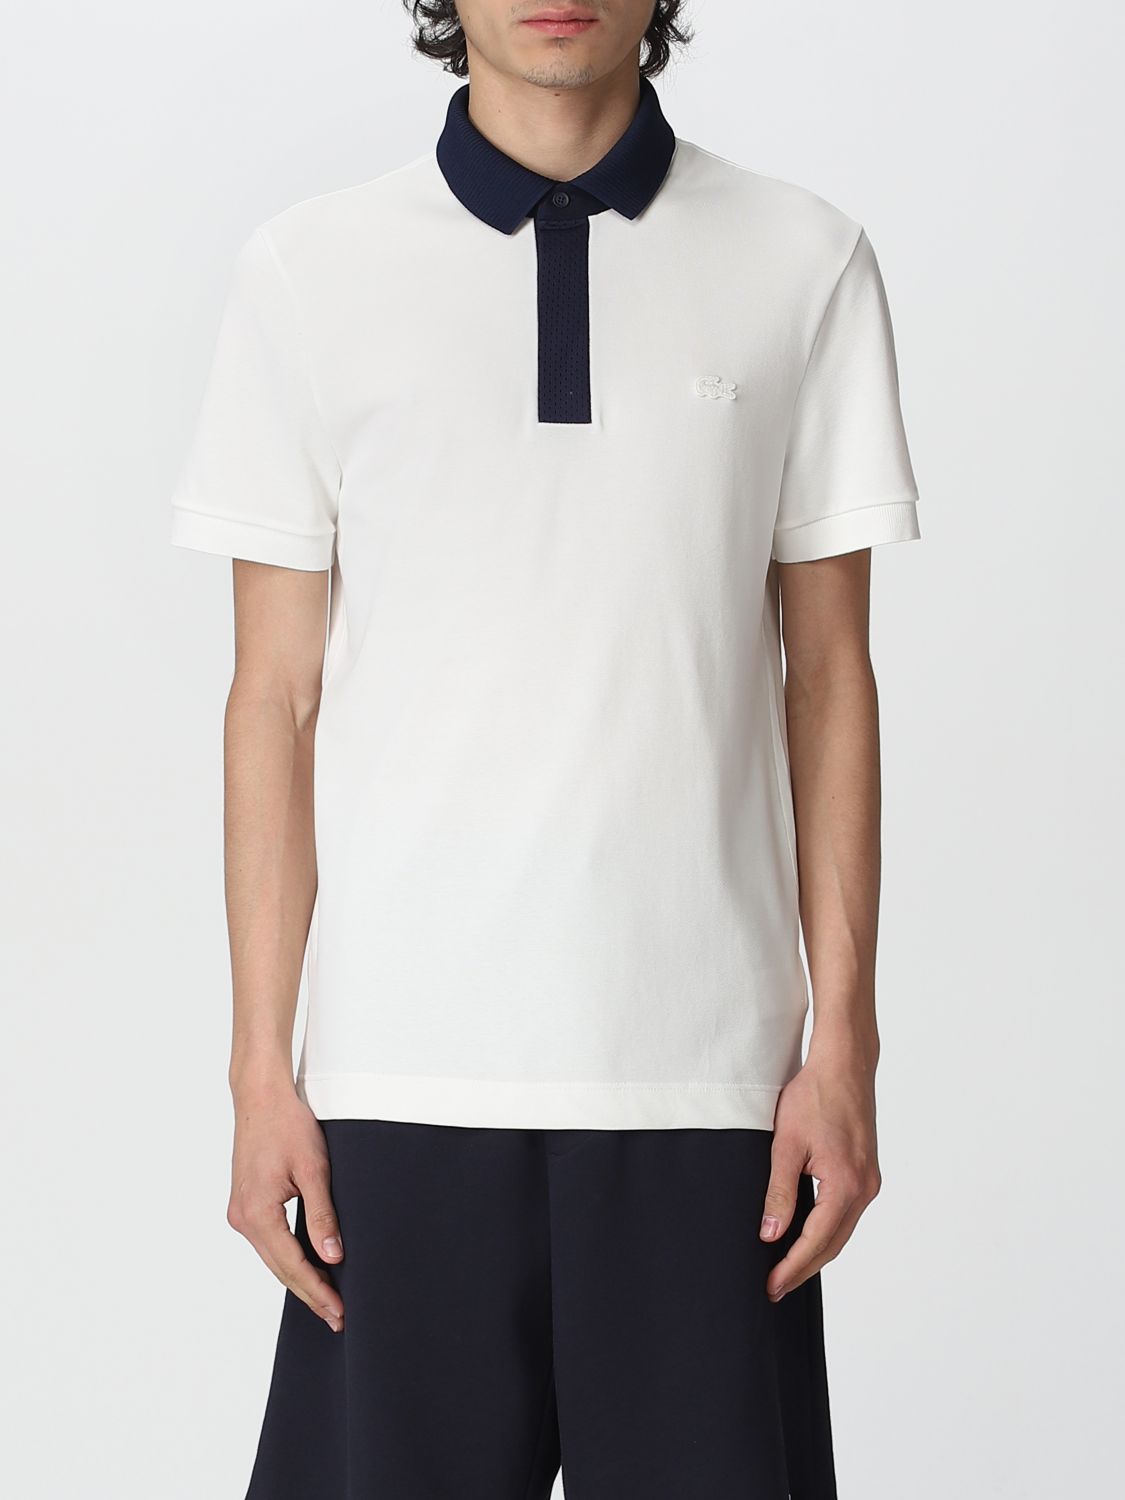 LACOSTE: polo shirt for man - White | Lacoste polo shirt PH5367 online ...